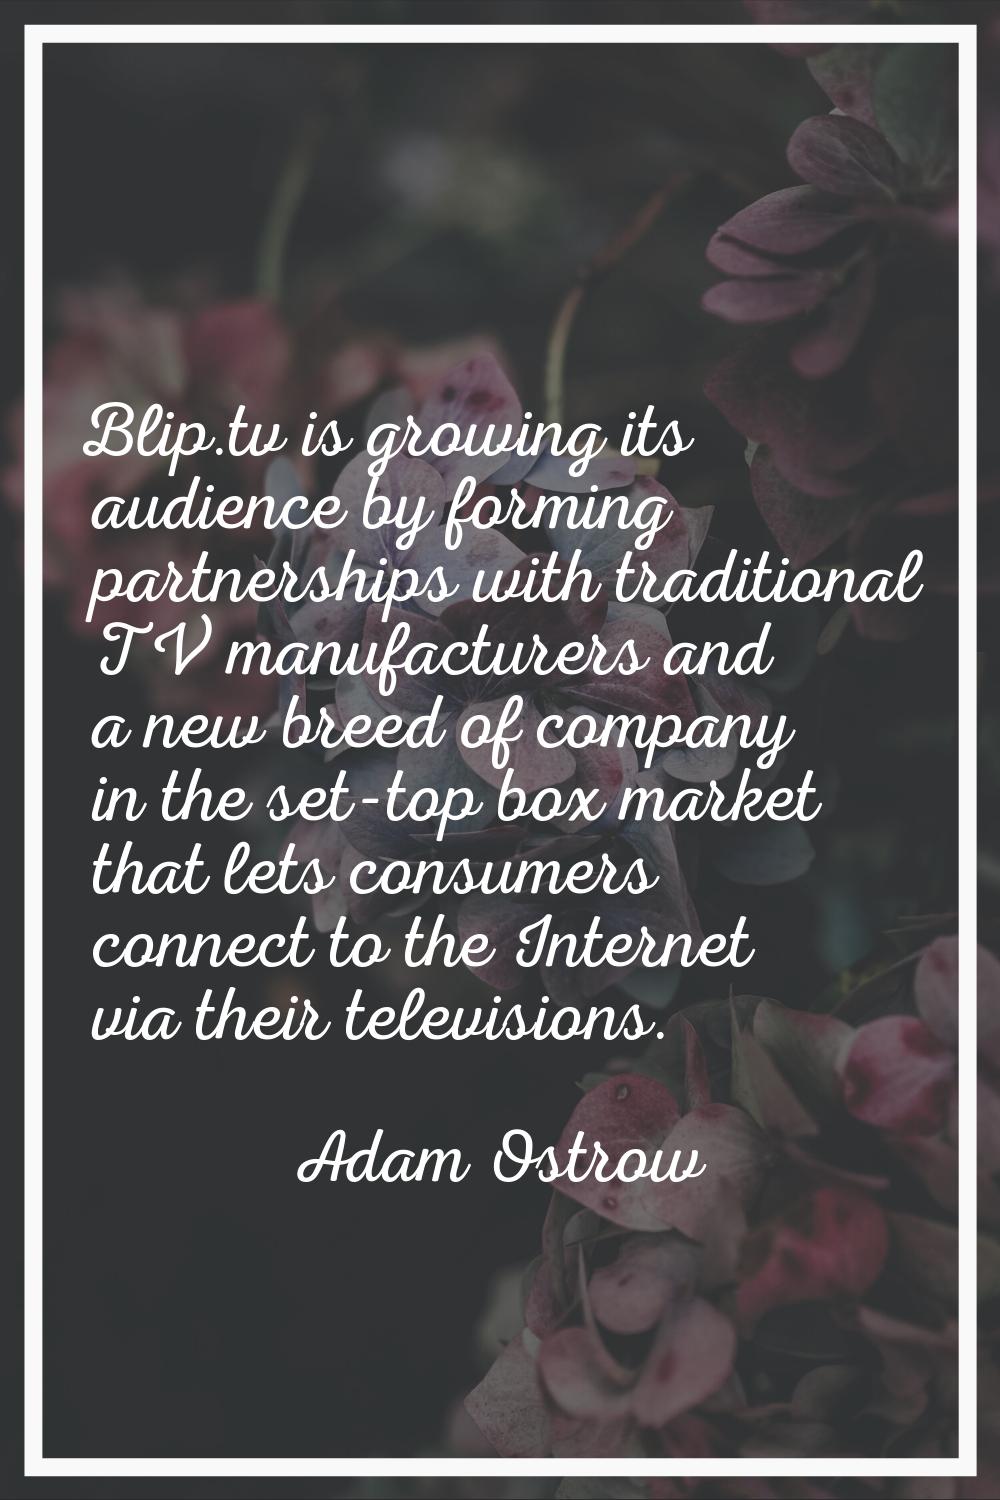 Blip.tv is growing its audience by forming partnerships with traditional TV manufacturers and a new